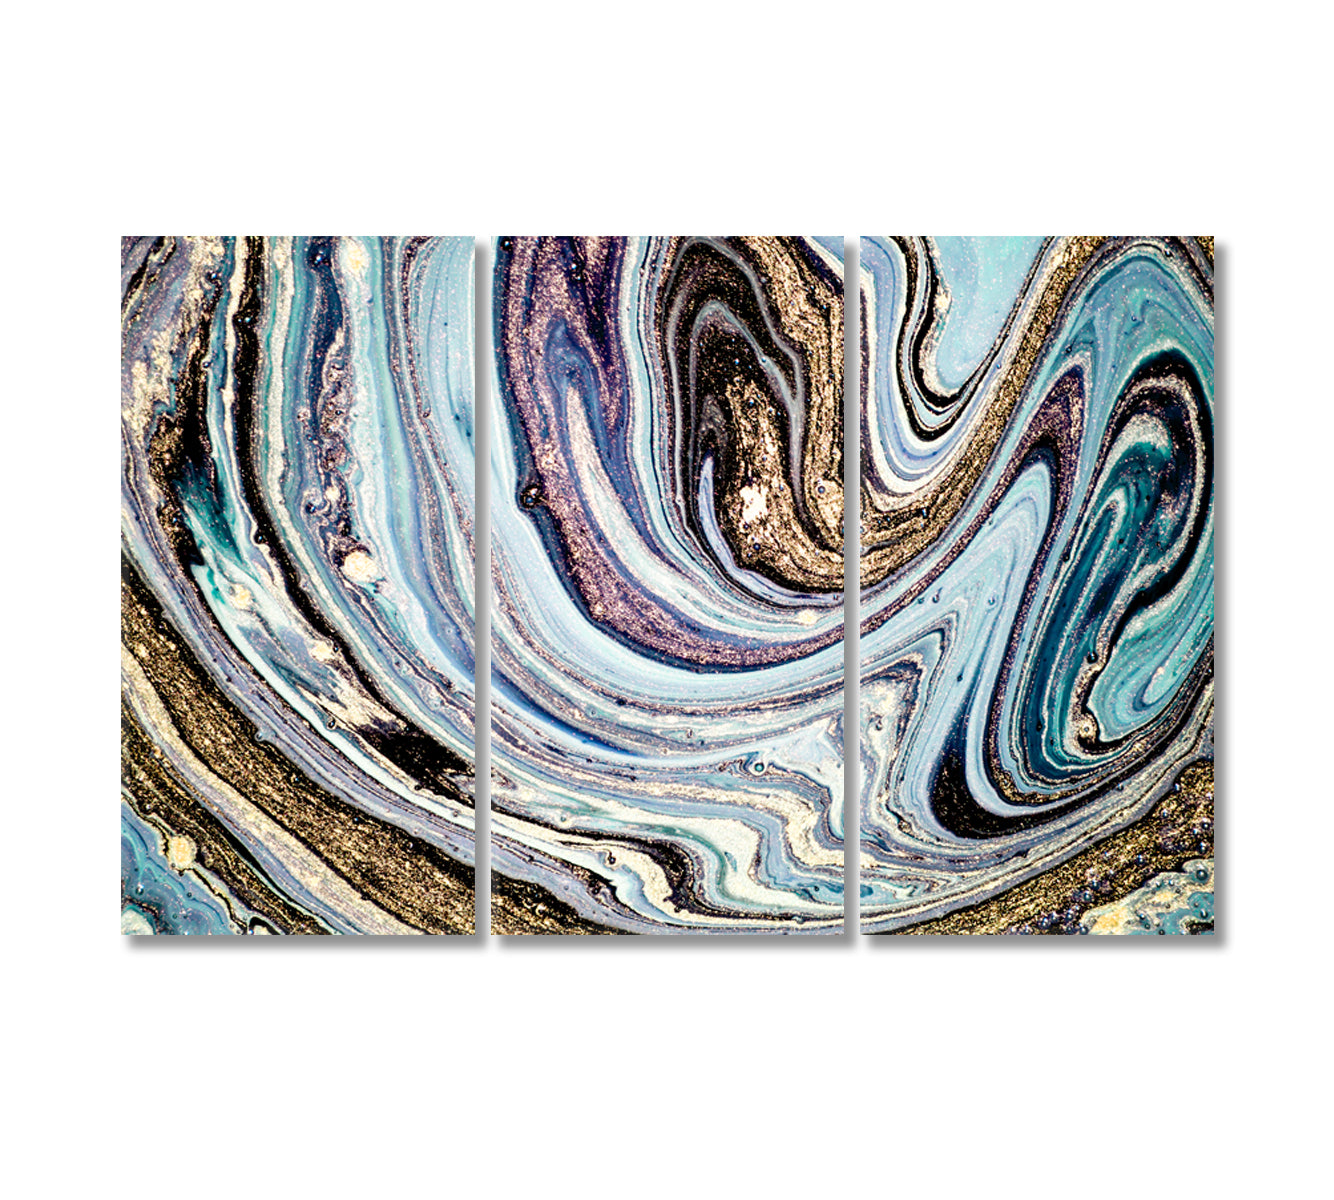 Blue Swirls of Marble Abstract Ripples of Agate Canvas Print-Canvas Print-CetArt-3 Panels-36x24 inches-CetArt